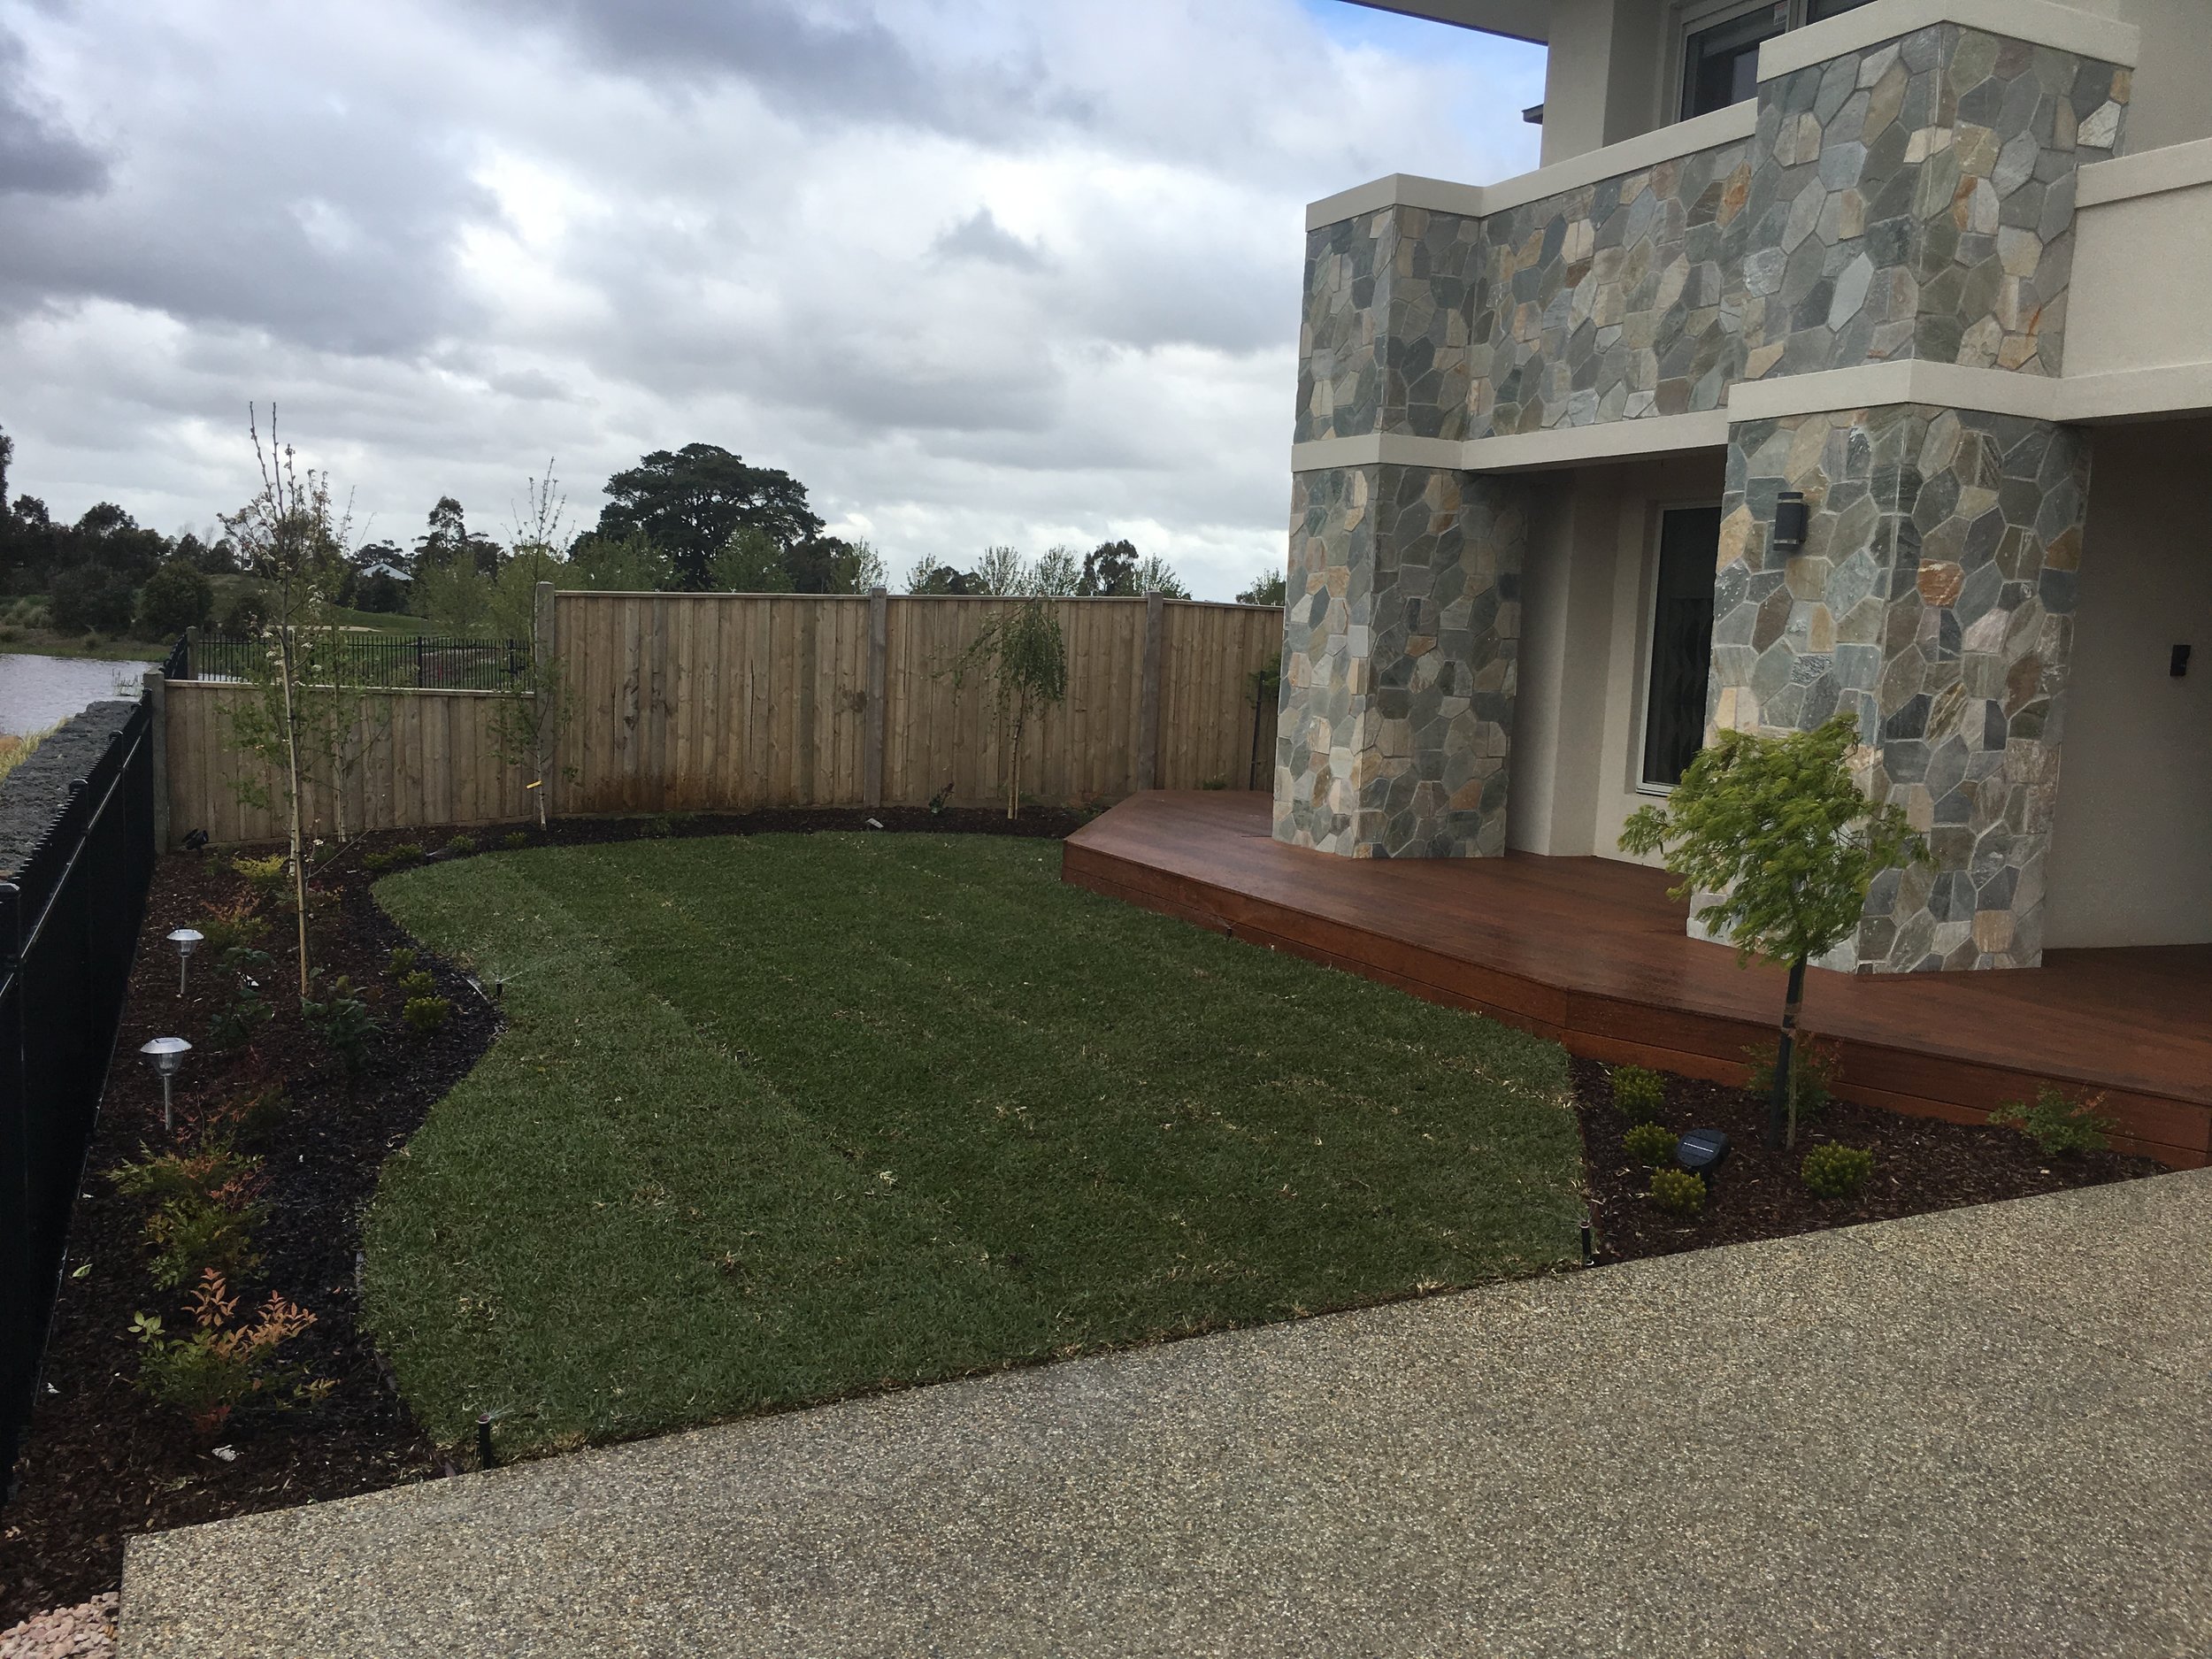 Instant turf, garden bed, deck and exposed aggregate